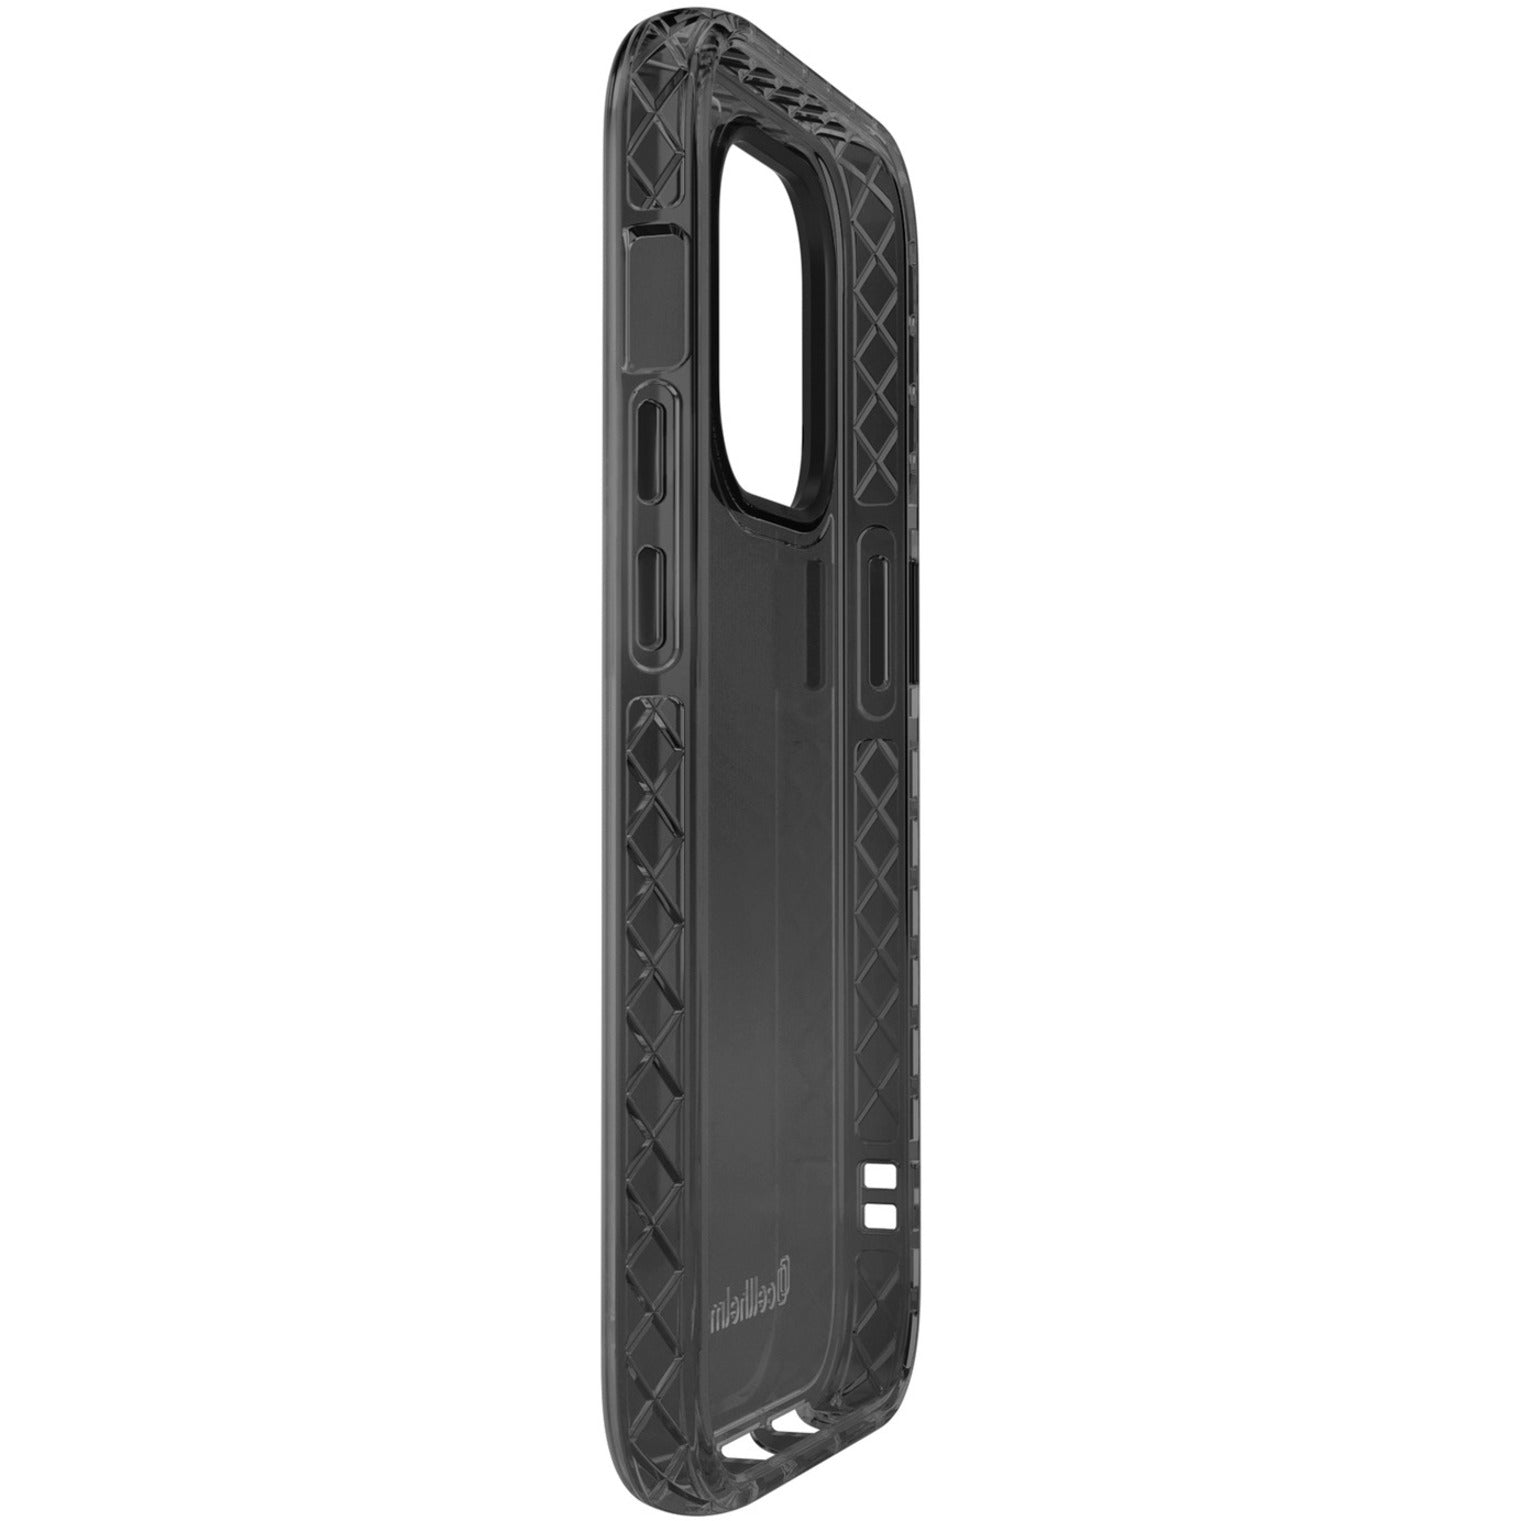 Altitude X Pro Series Phone Case for iPhone 14 Pro Max, 6.7-Inch 2022 (Onyx Black) [Discontinued]